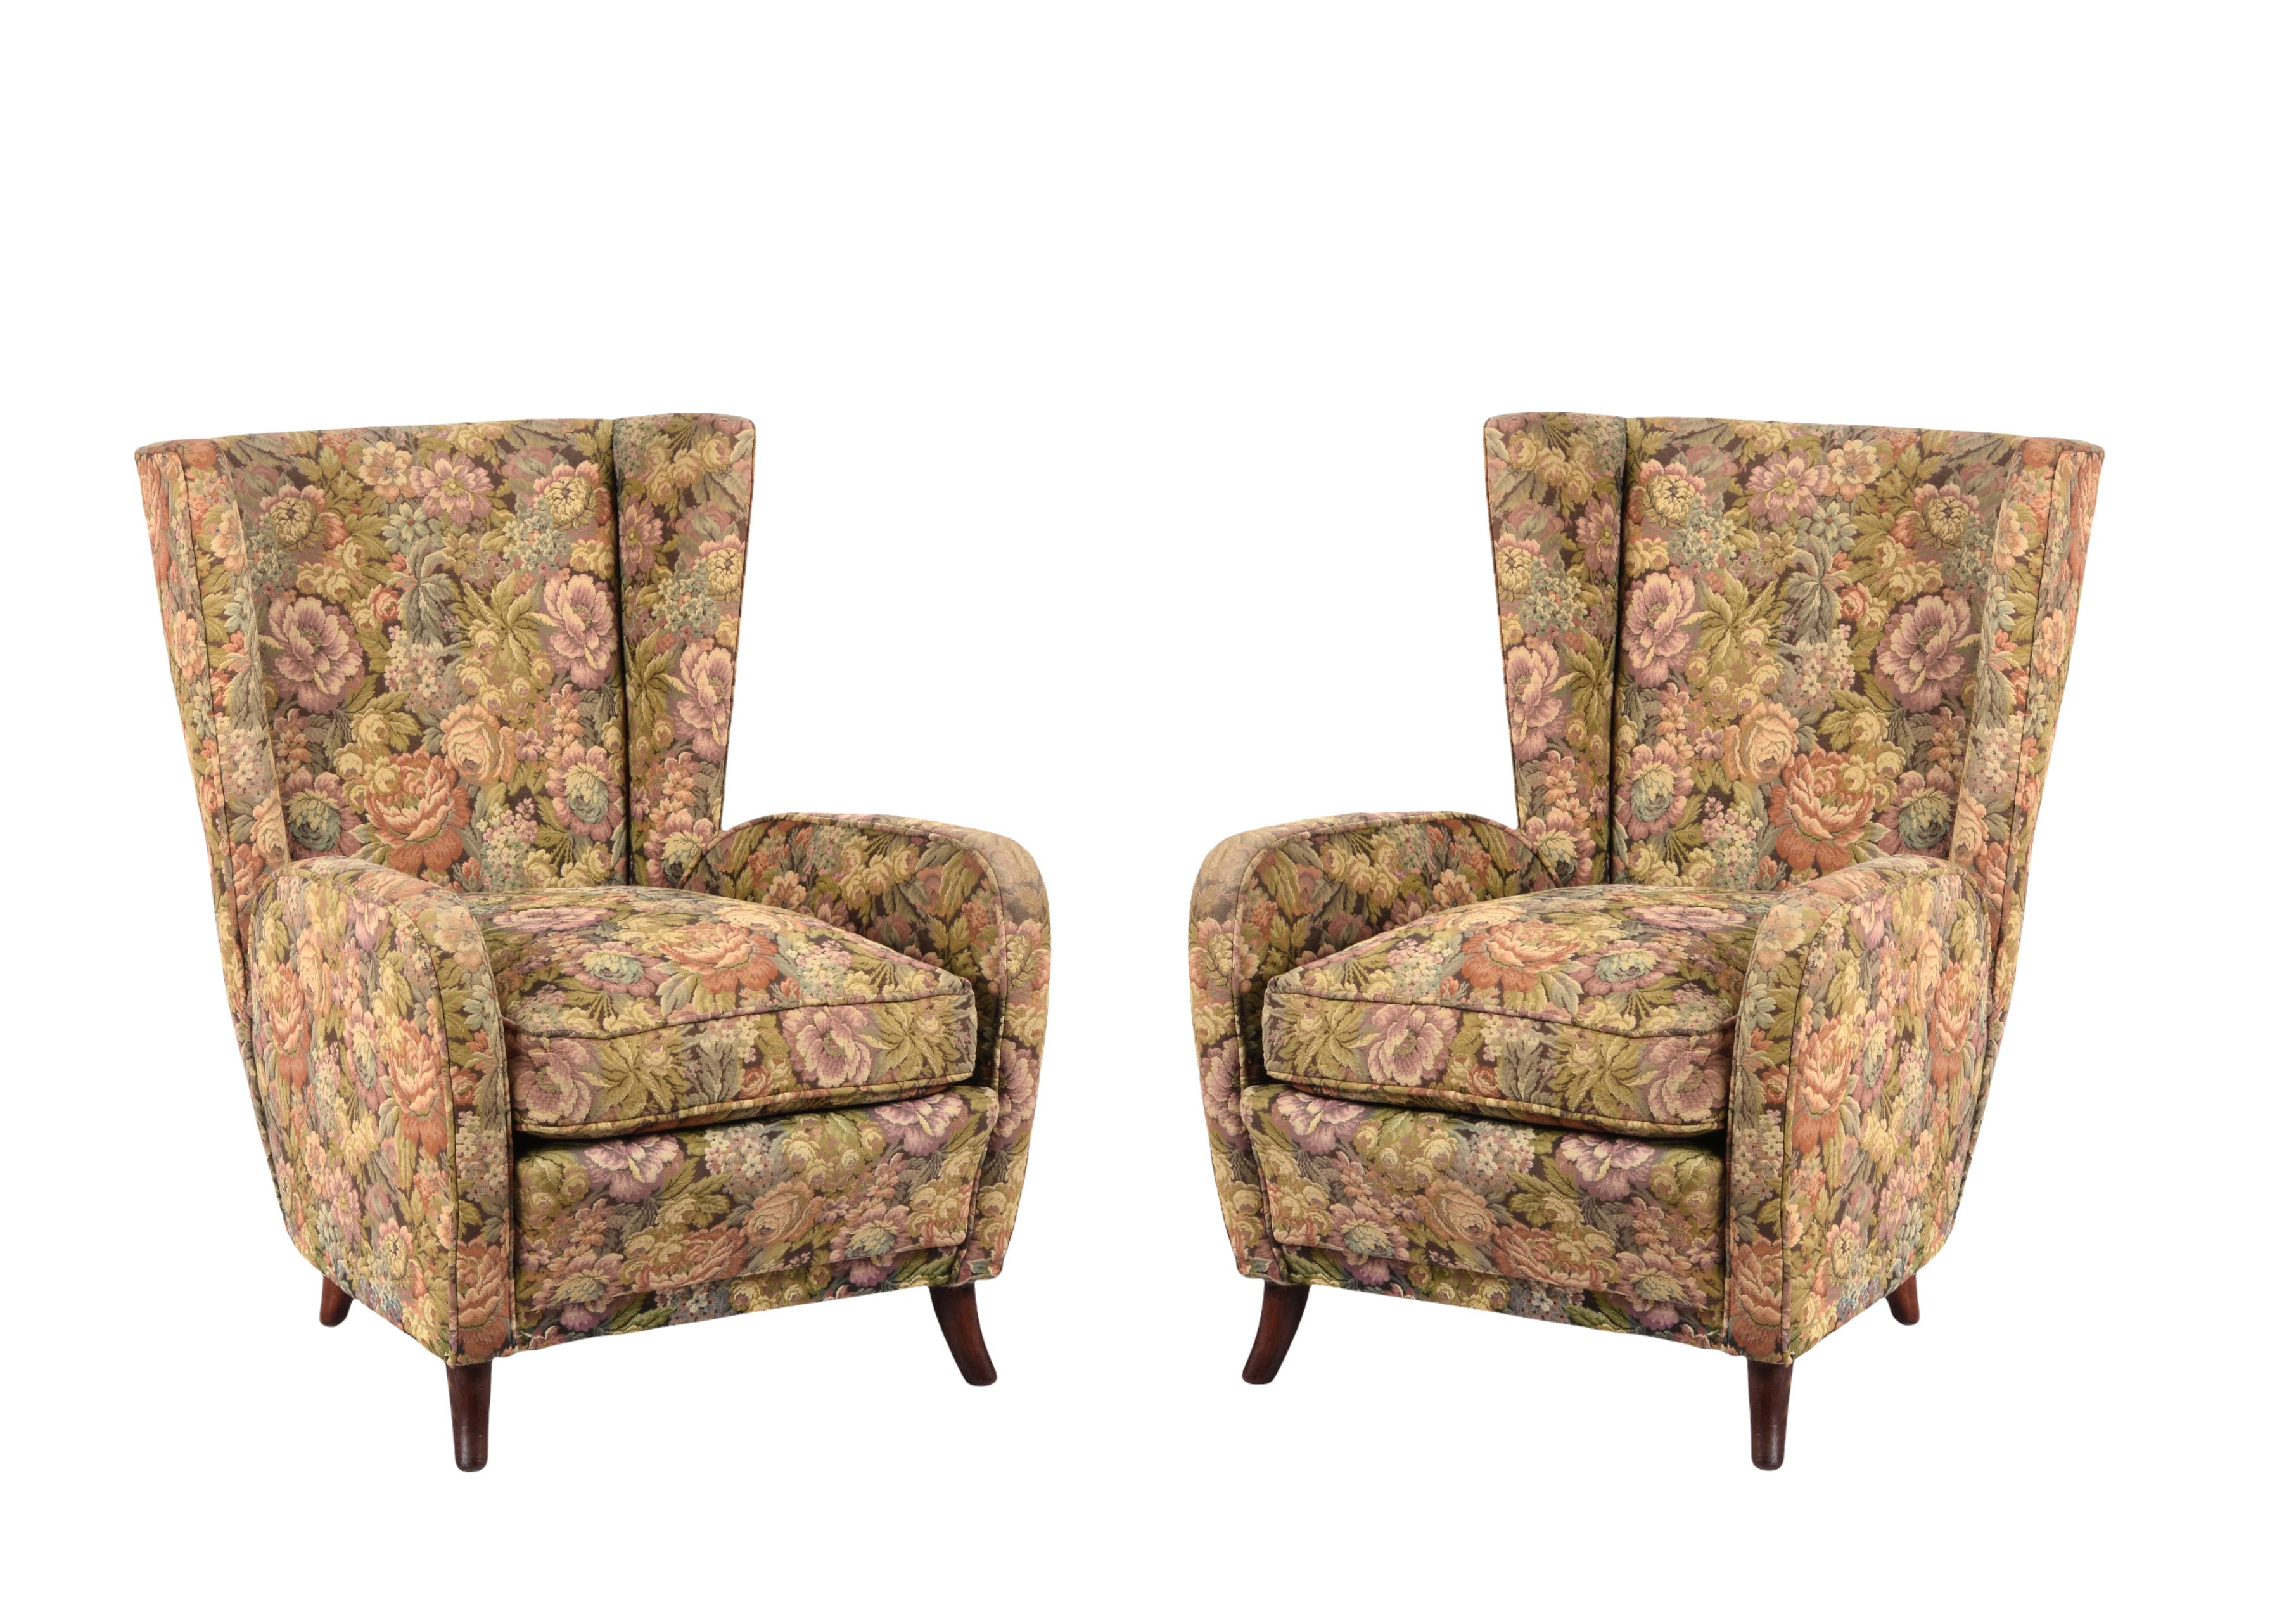 These wonderful and iconic armchairs were produced in Italy during the 1950s. The Armchairs have the original floral wool upholstery.

The harmony of the lines and the elegant and midcentury color mix is breathtaking, these items are perfect for a